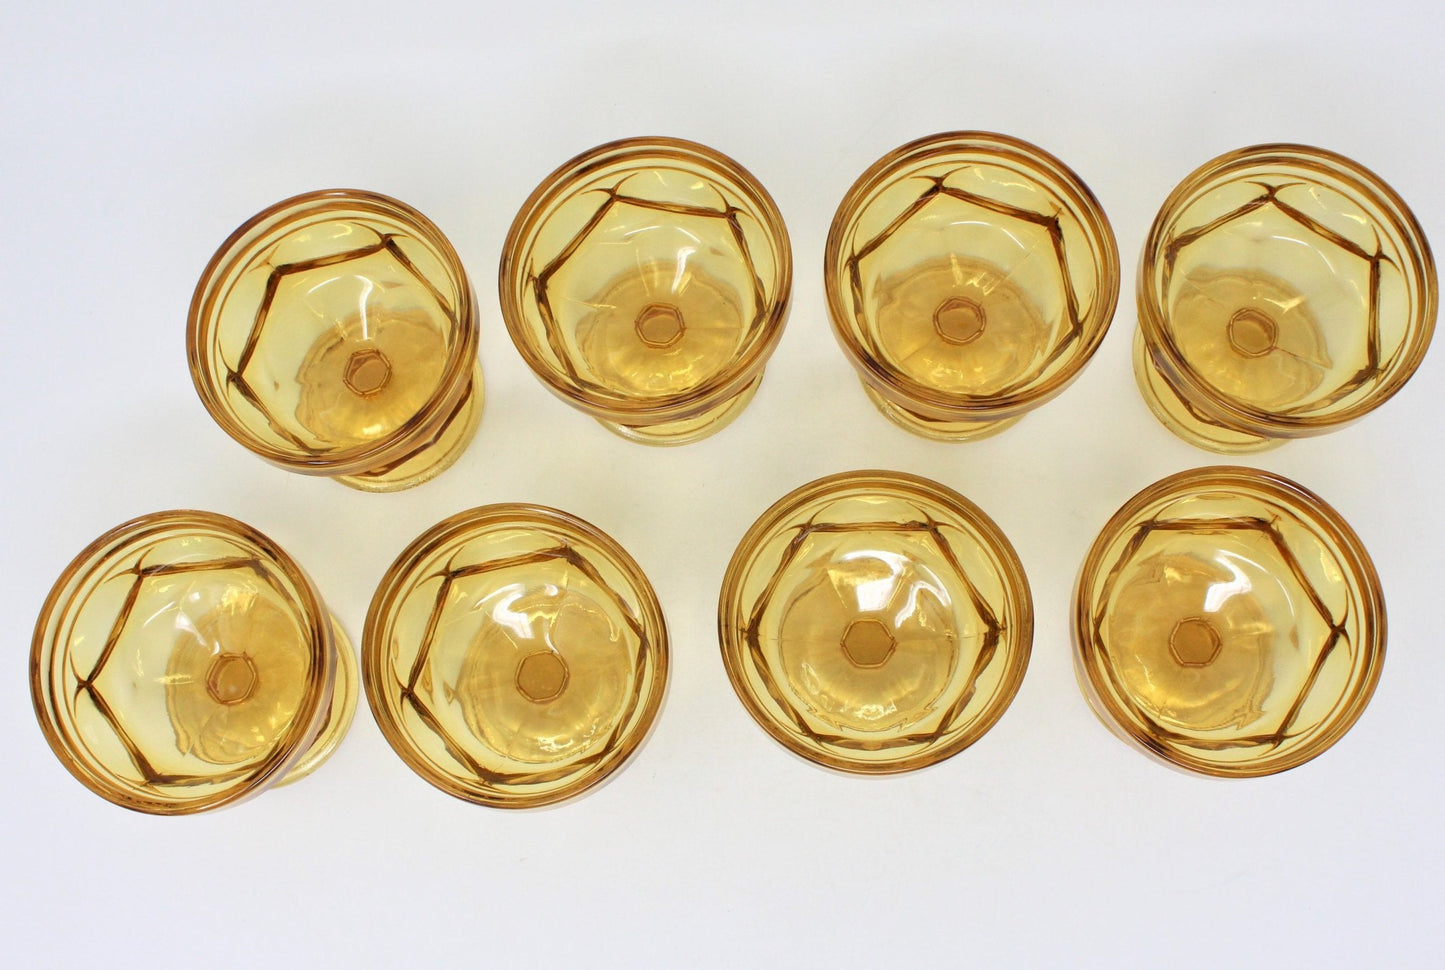 Champagne / Low Sherbet, Anchor Hocking, Fairfield Amber Glass, Set of 8, Vintage